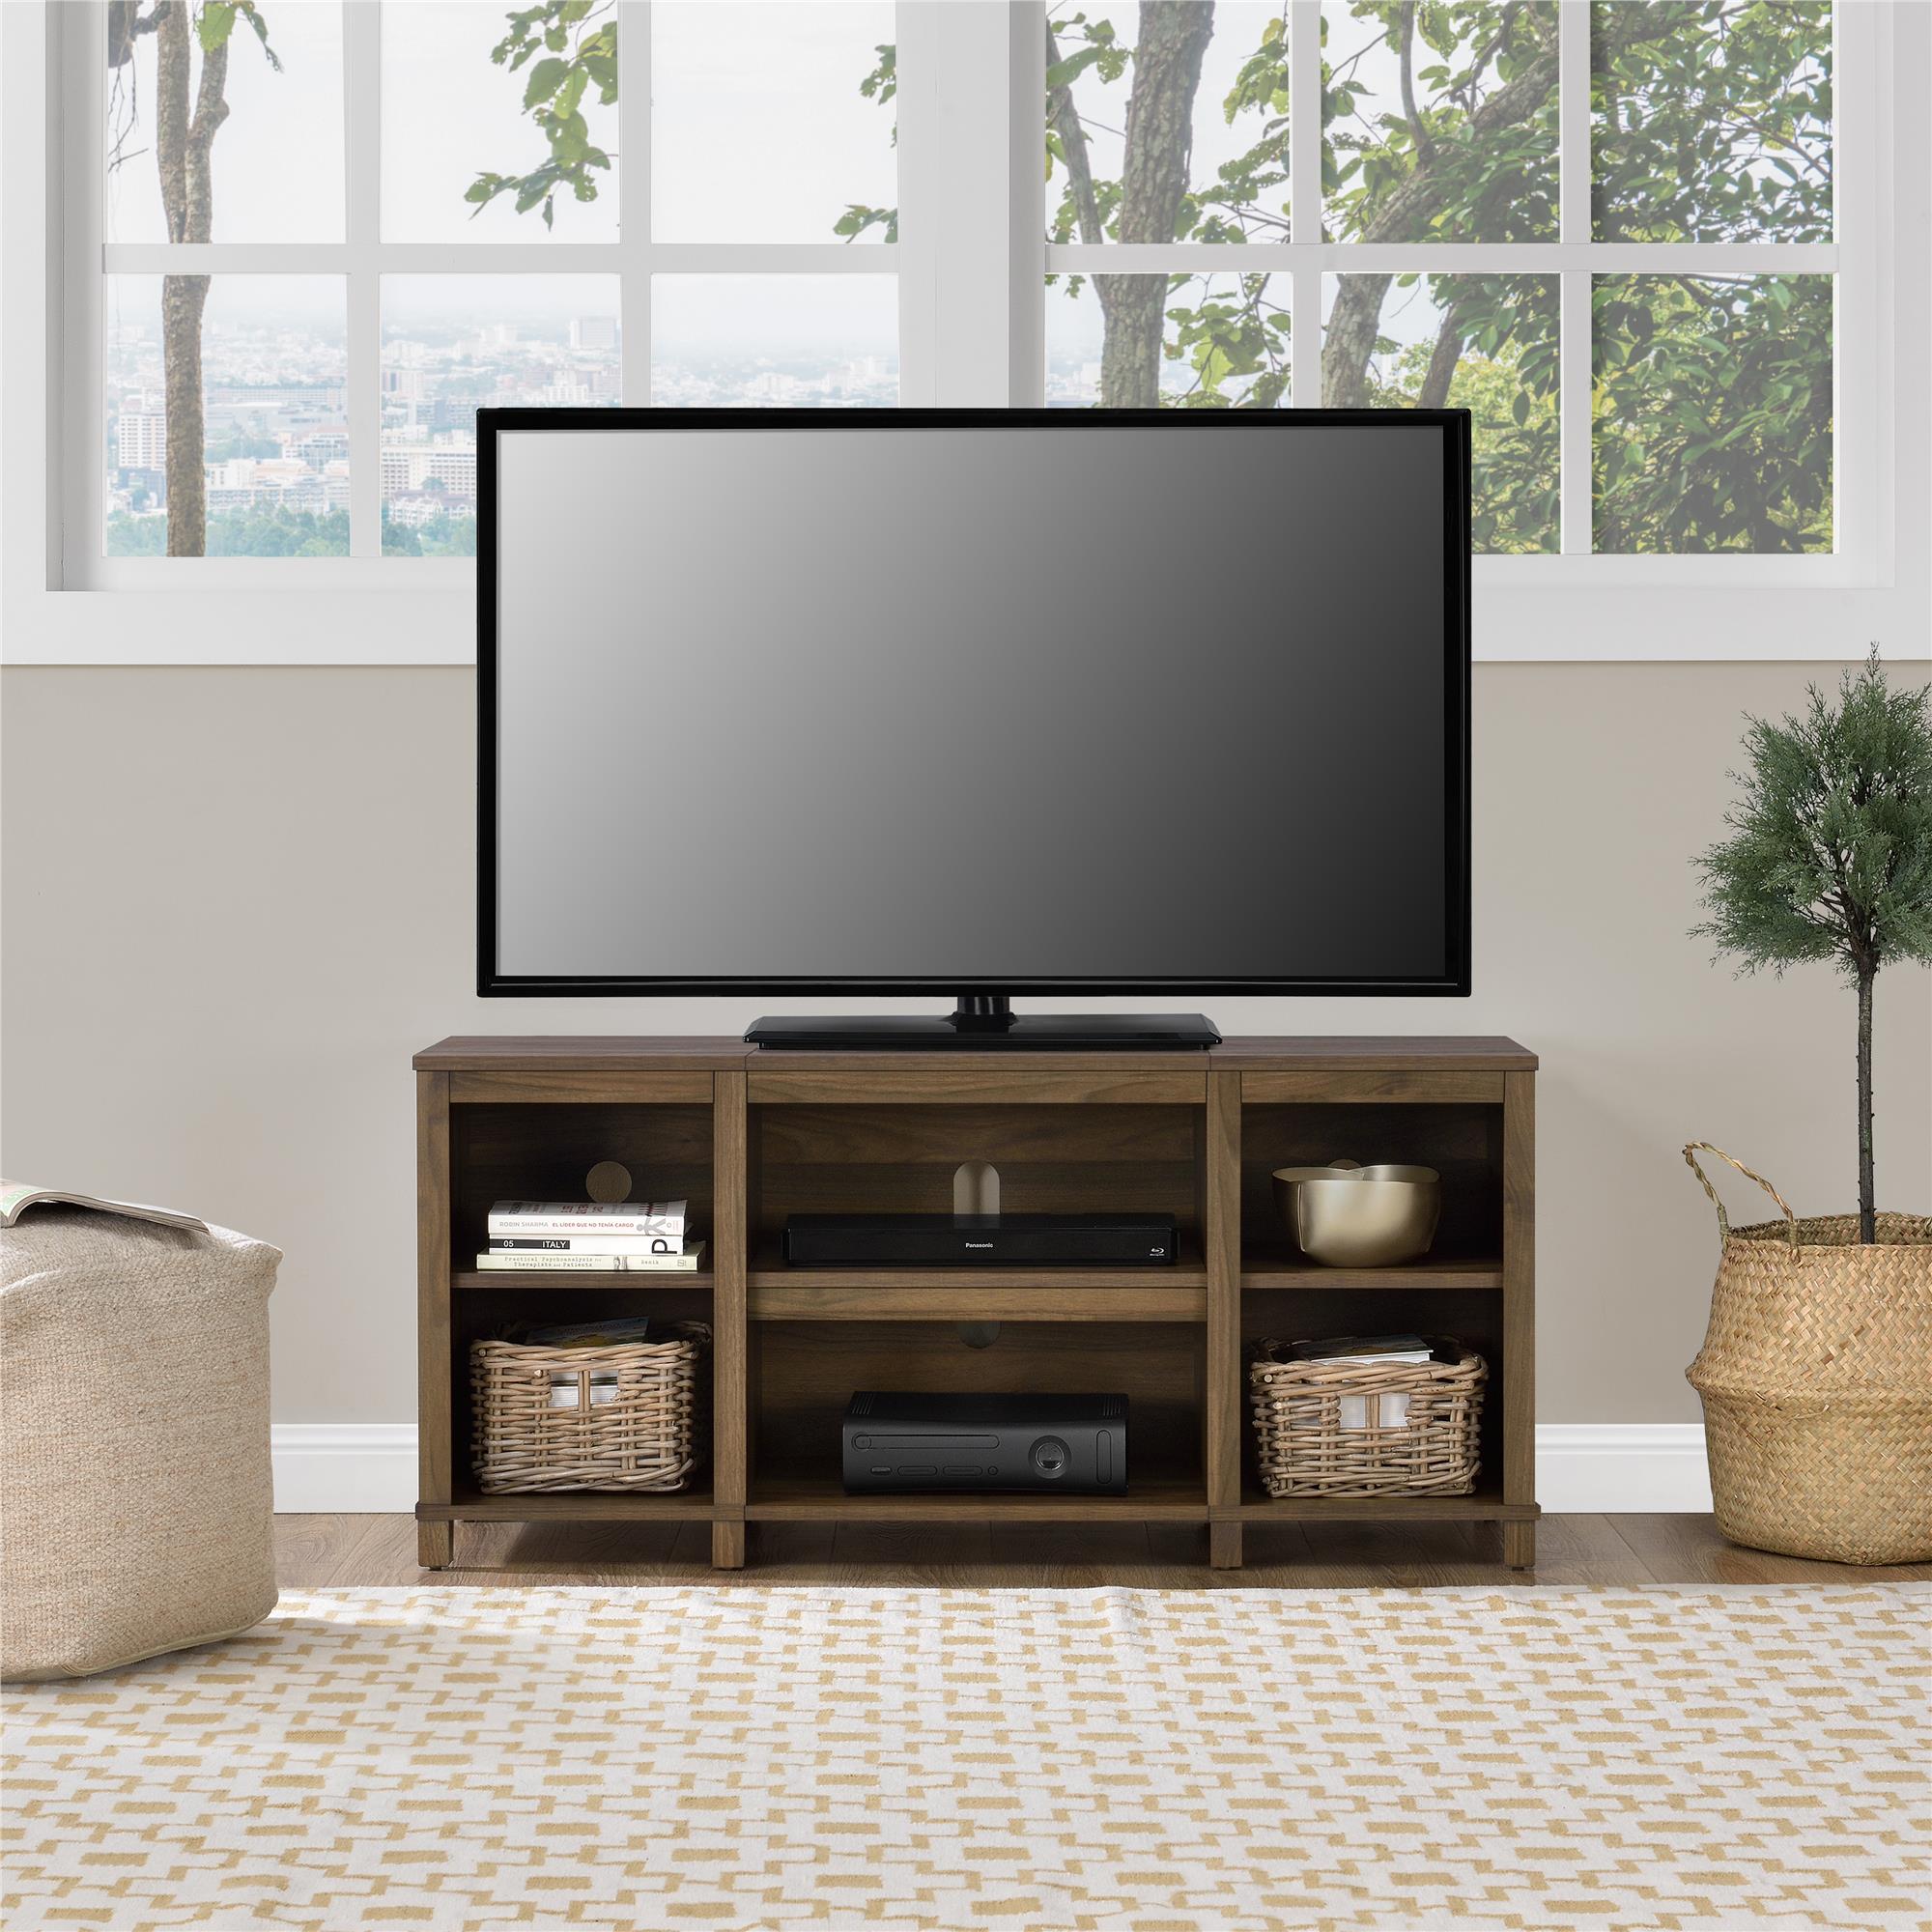 Mainstays Parsons TV Stand for TVs up to 50", Canyon Walnut - image 5 of 15